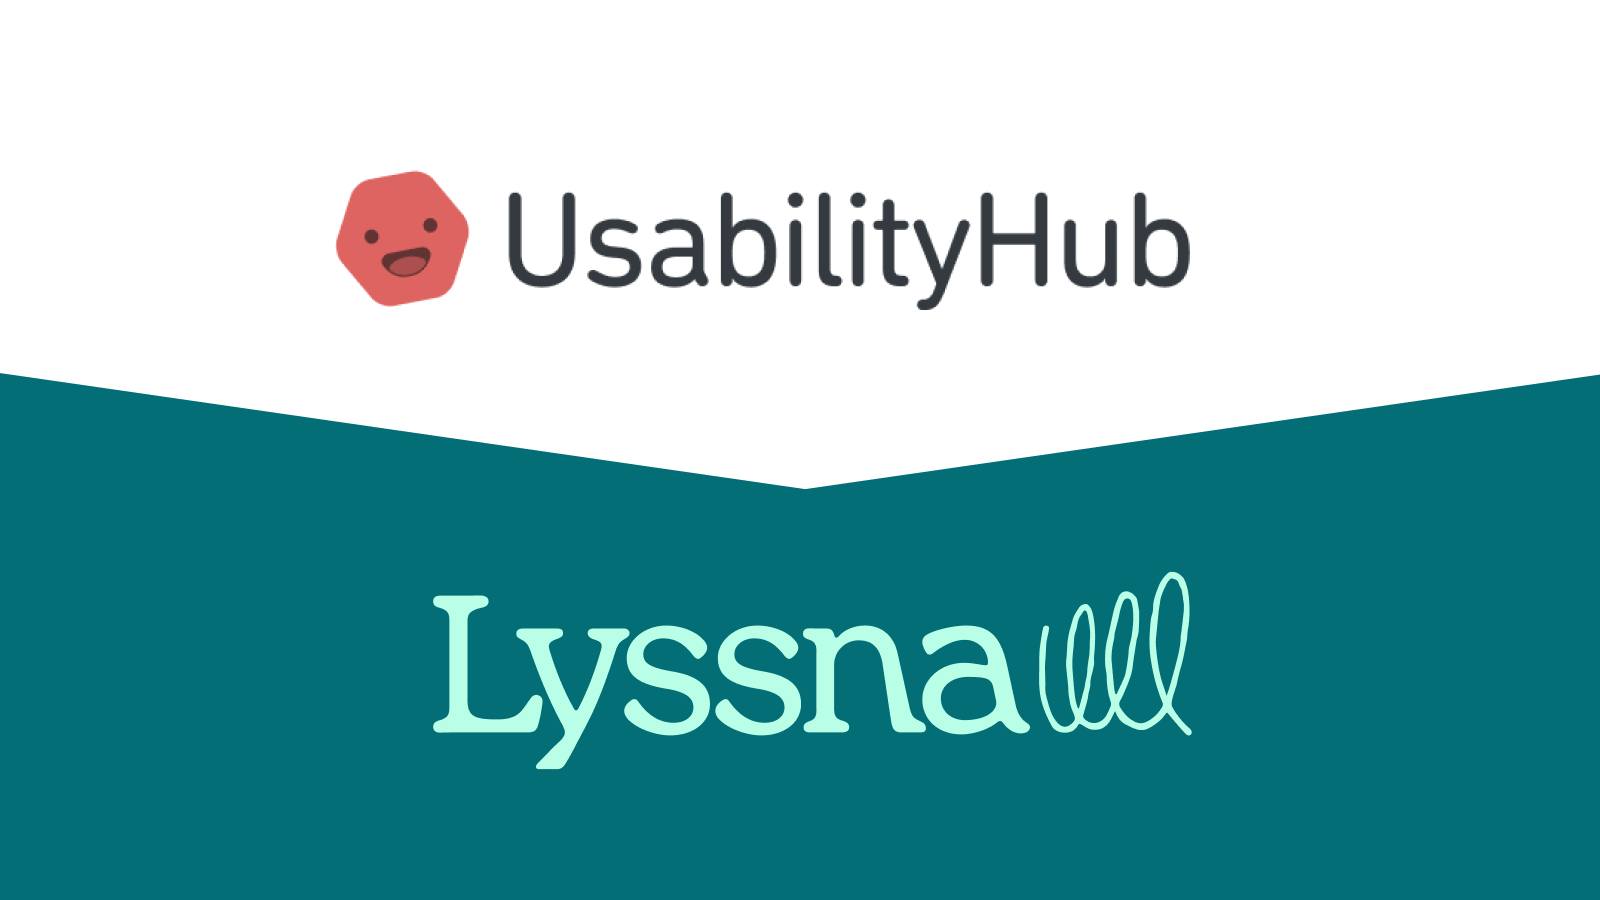 The UsabilityHub logo and the Lyssna logo.